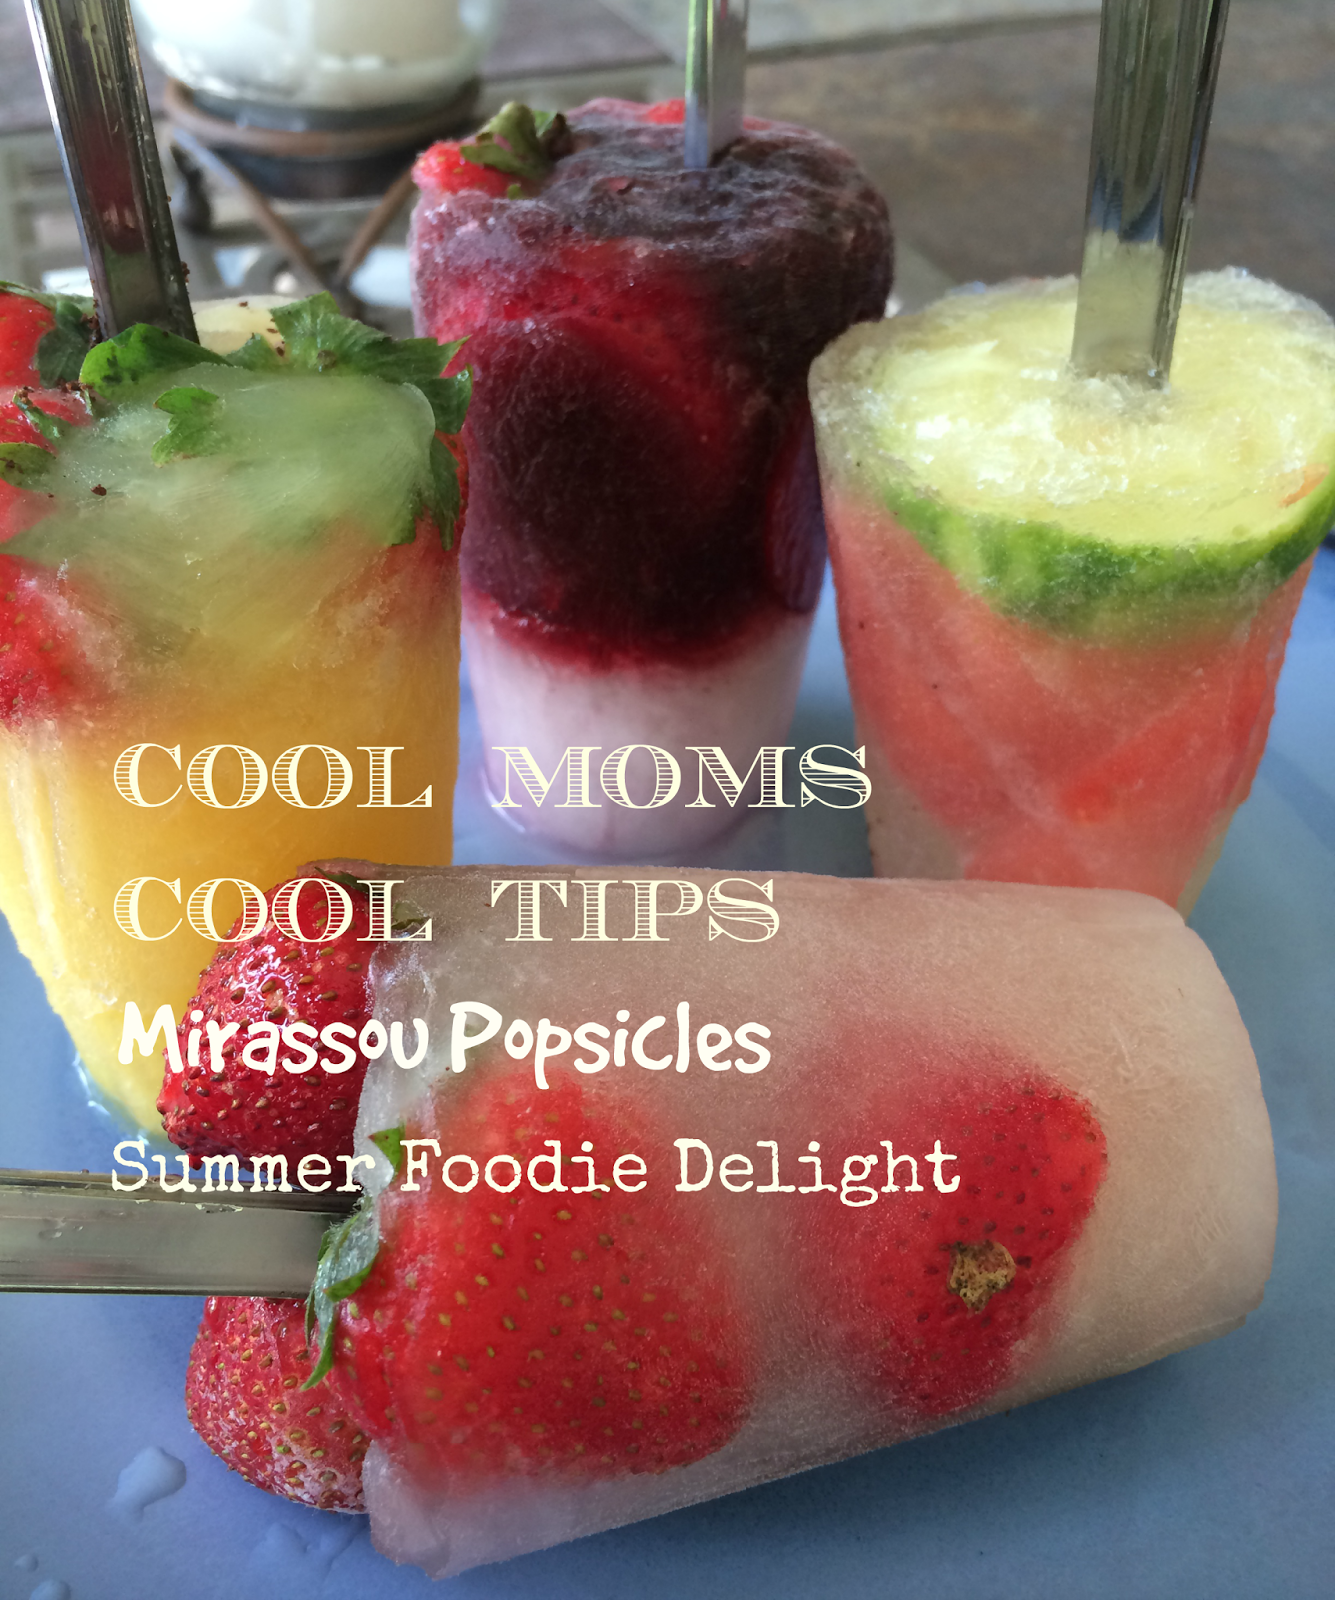 cool moms cool tips Mirassou popsicle yummines